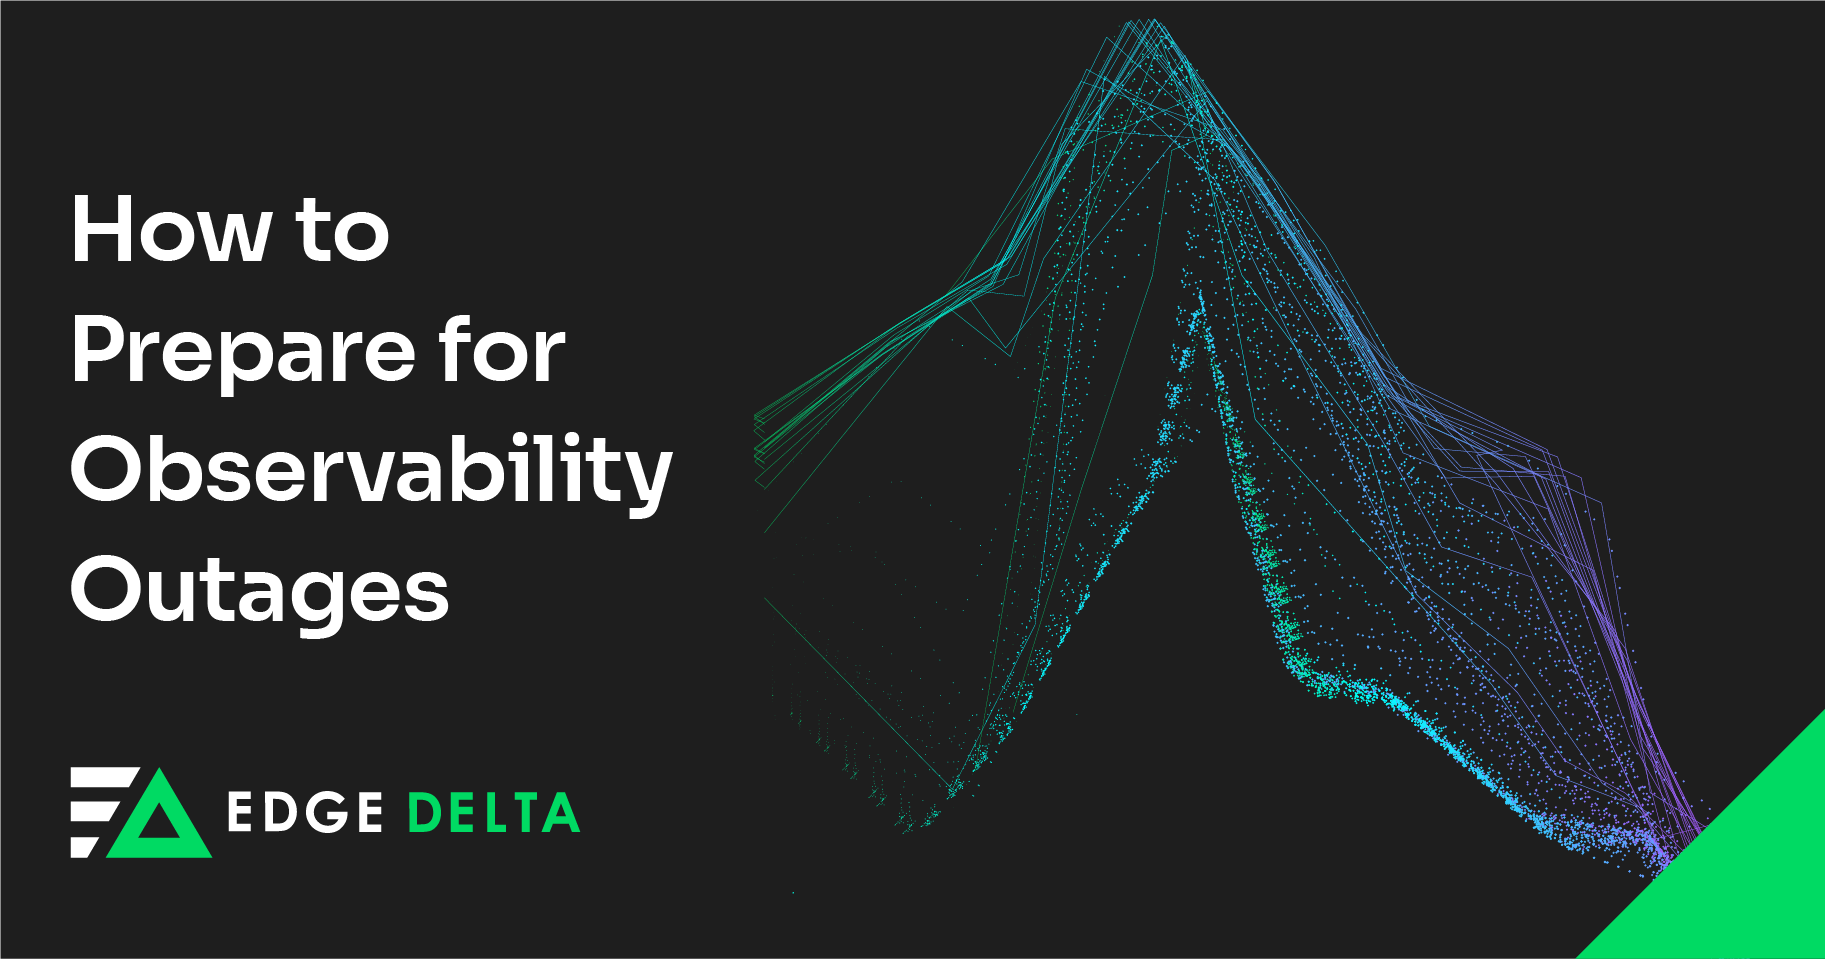 How to Prepare for Observability Outages